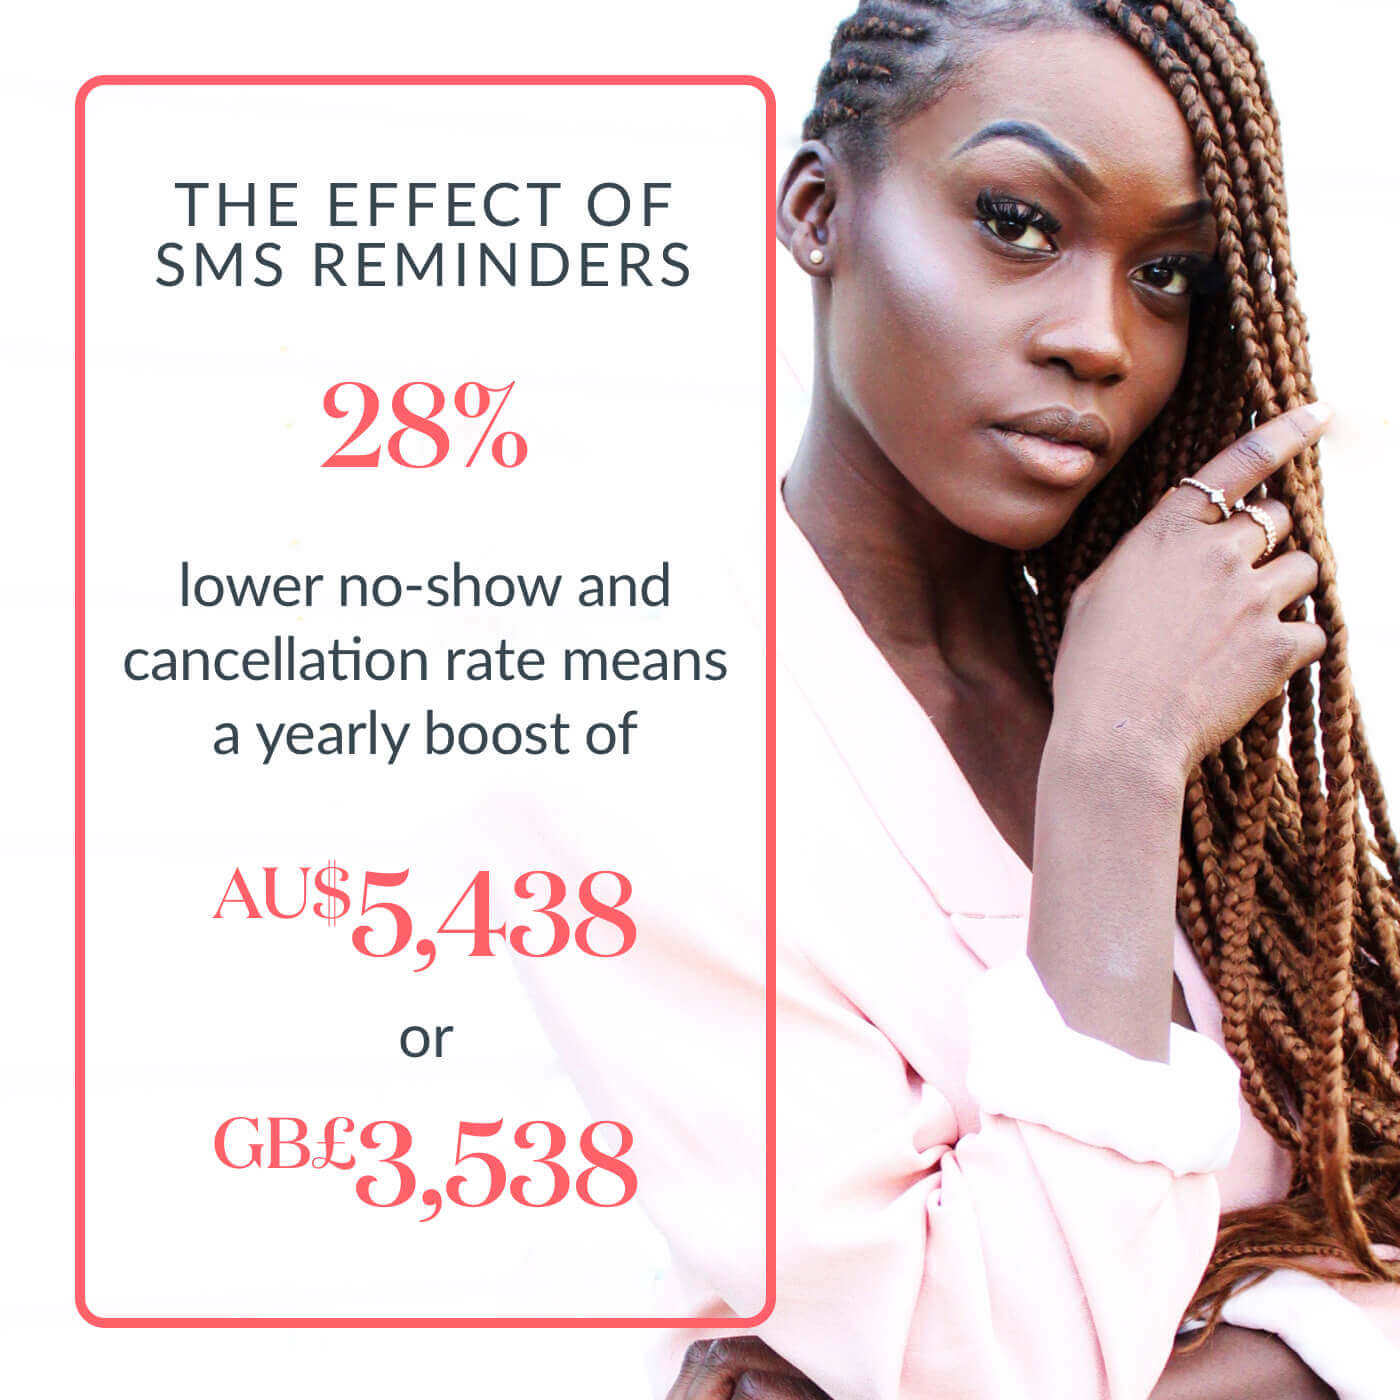 The effects of SMS reminders on your business.